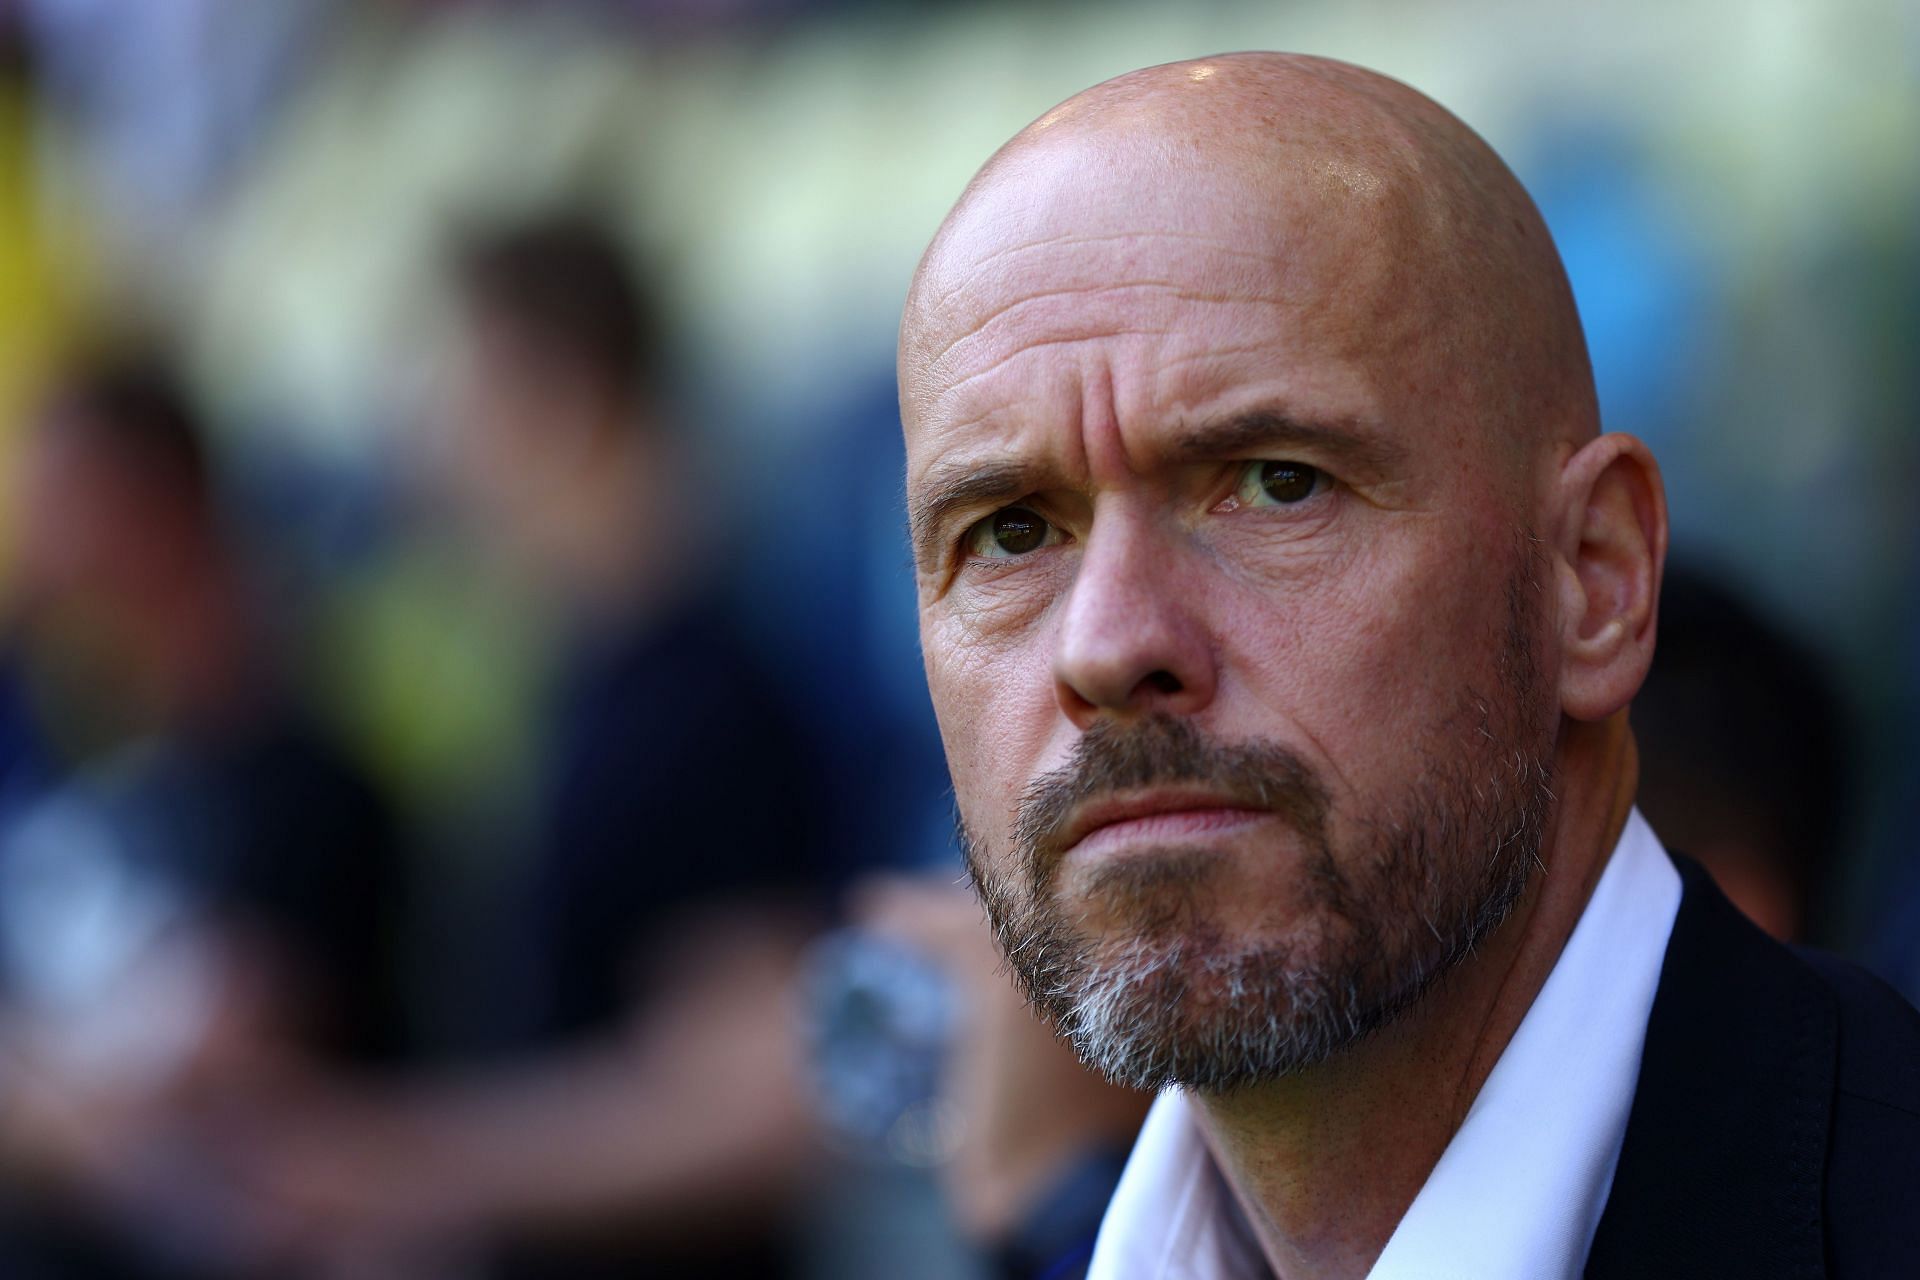 Erik ten Hag will have his work cut out at Manchester United